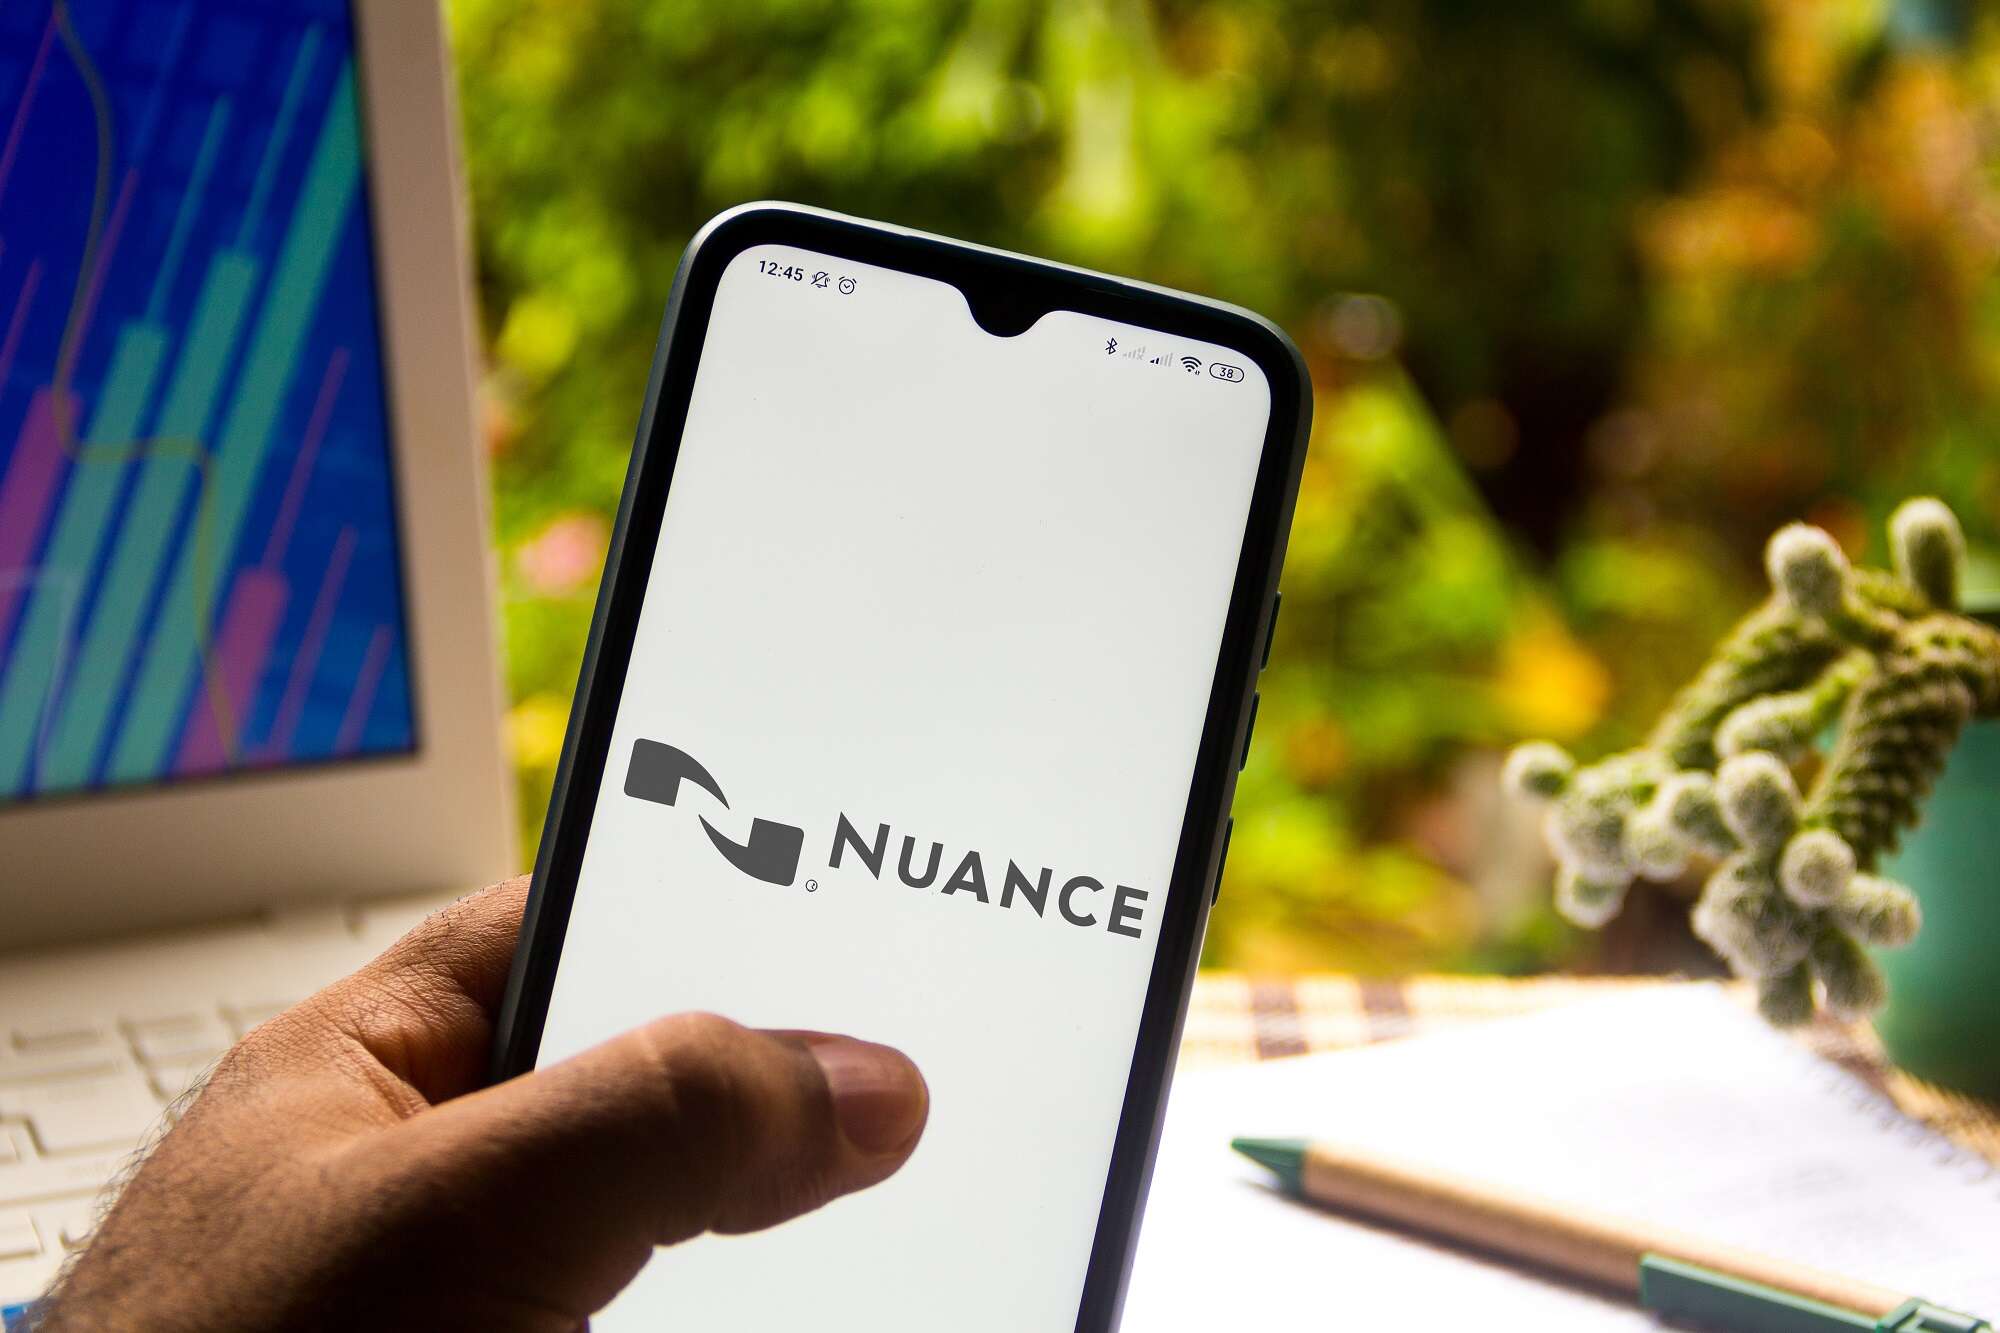 Microsoft's Nuance acquisition will help bolster its 'vertical clouds'